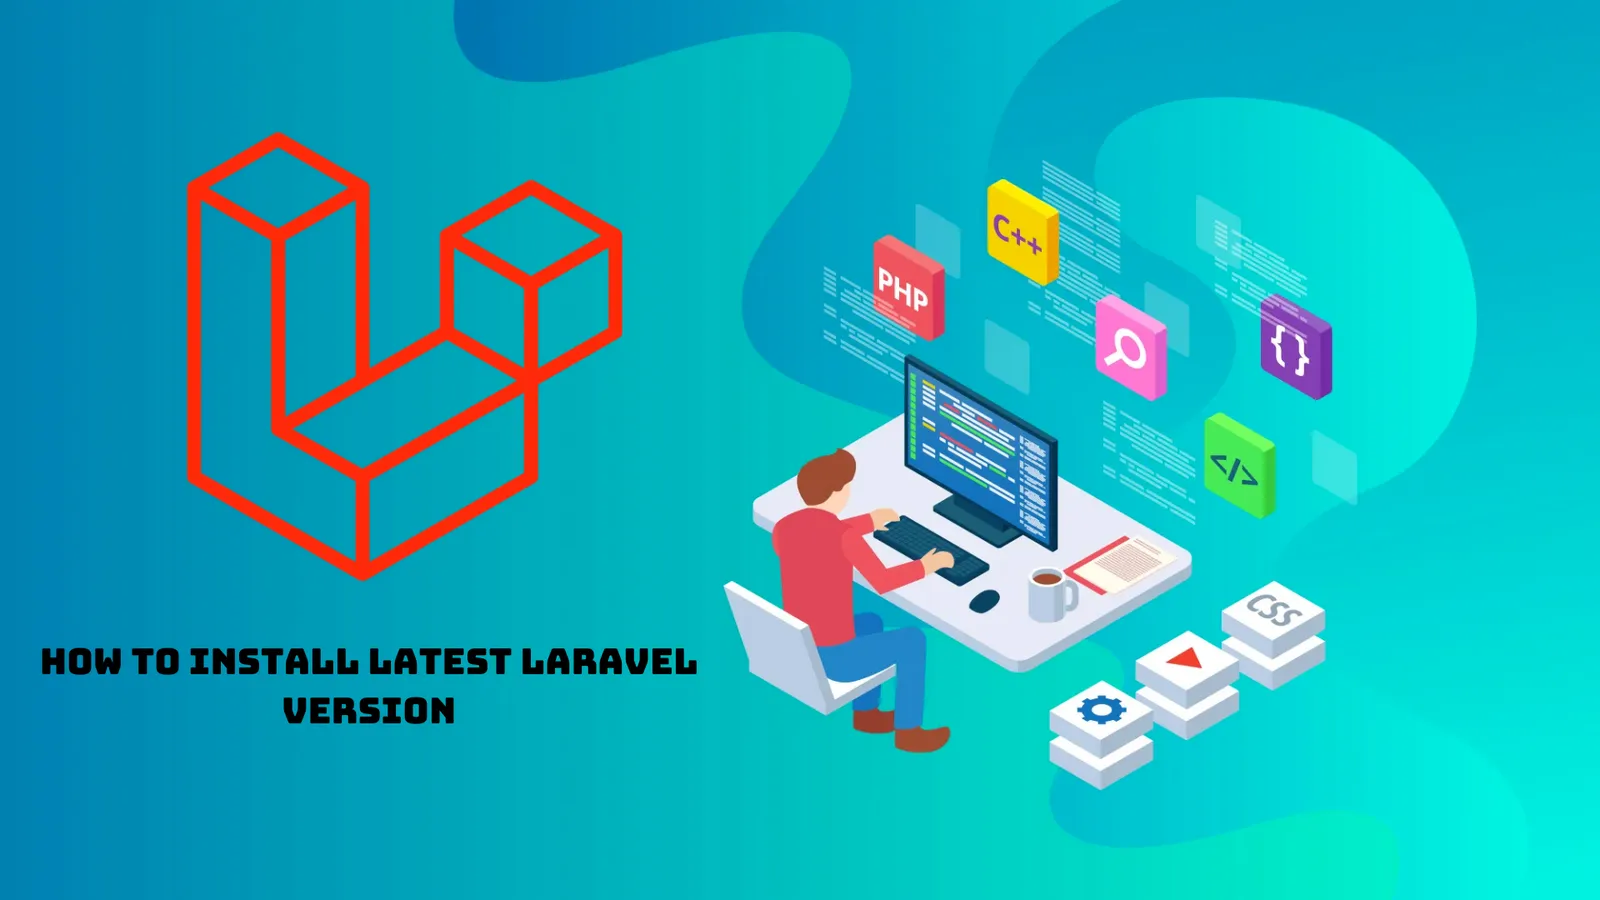 How to Install Latest Laravel Version